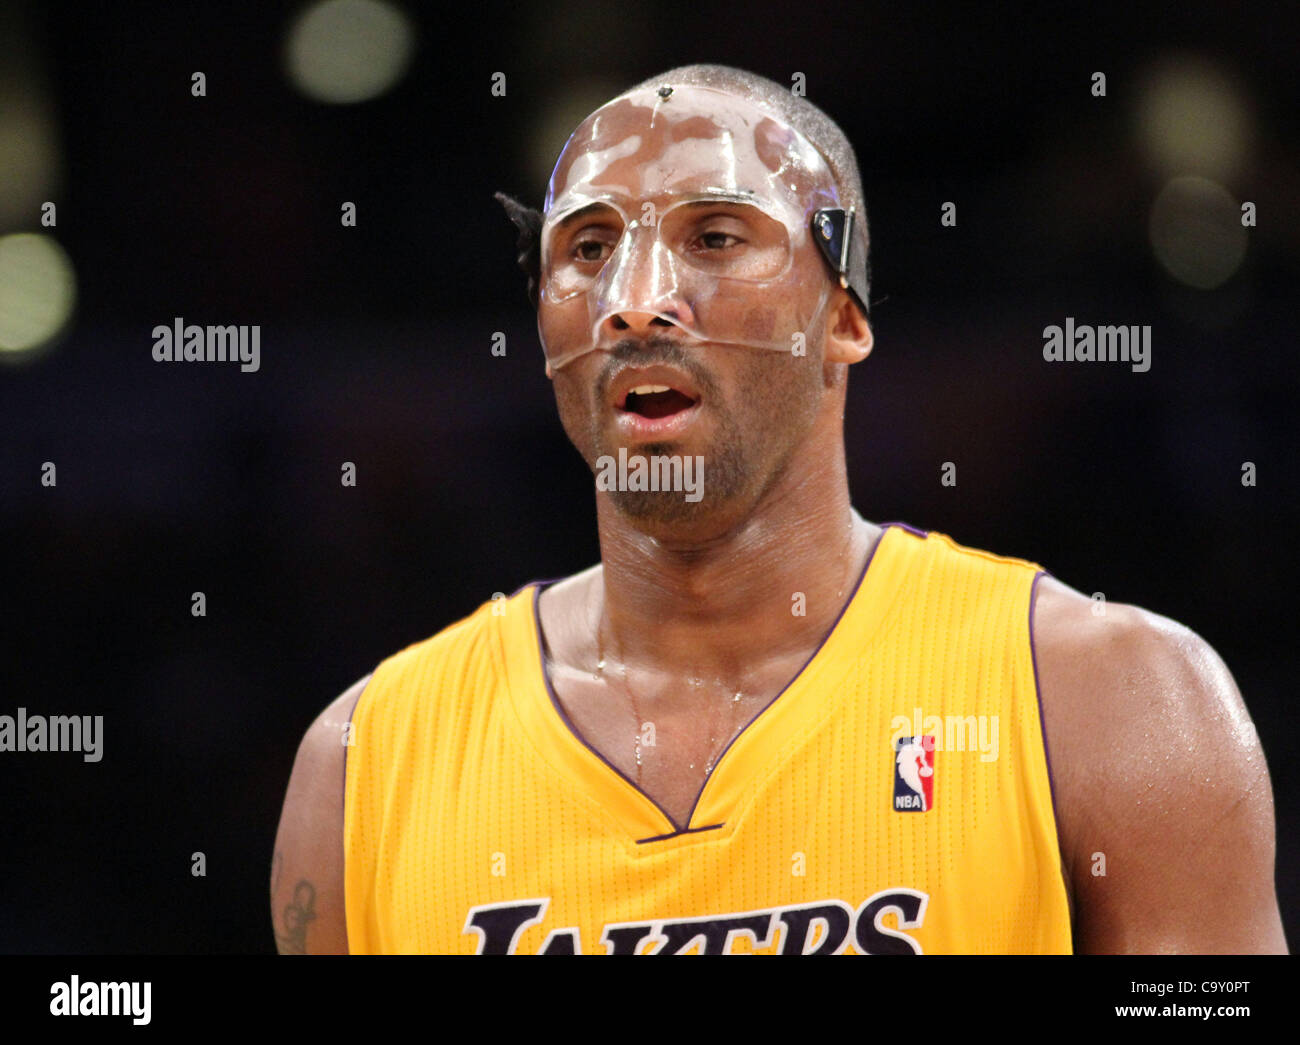 April 30, 2012 - Los Angeles, California,  - Lakers guard Kobe Bryant  wears protective gear during game against Timberwolves as the Los Angeles  Lakers defeat the visiting Minnesota Timberwolves 104 -